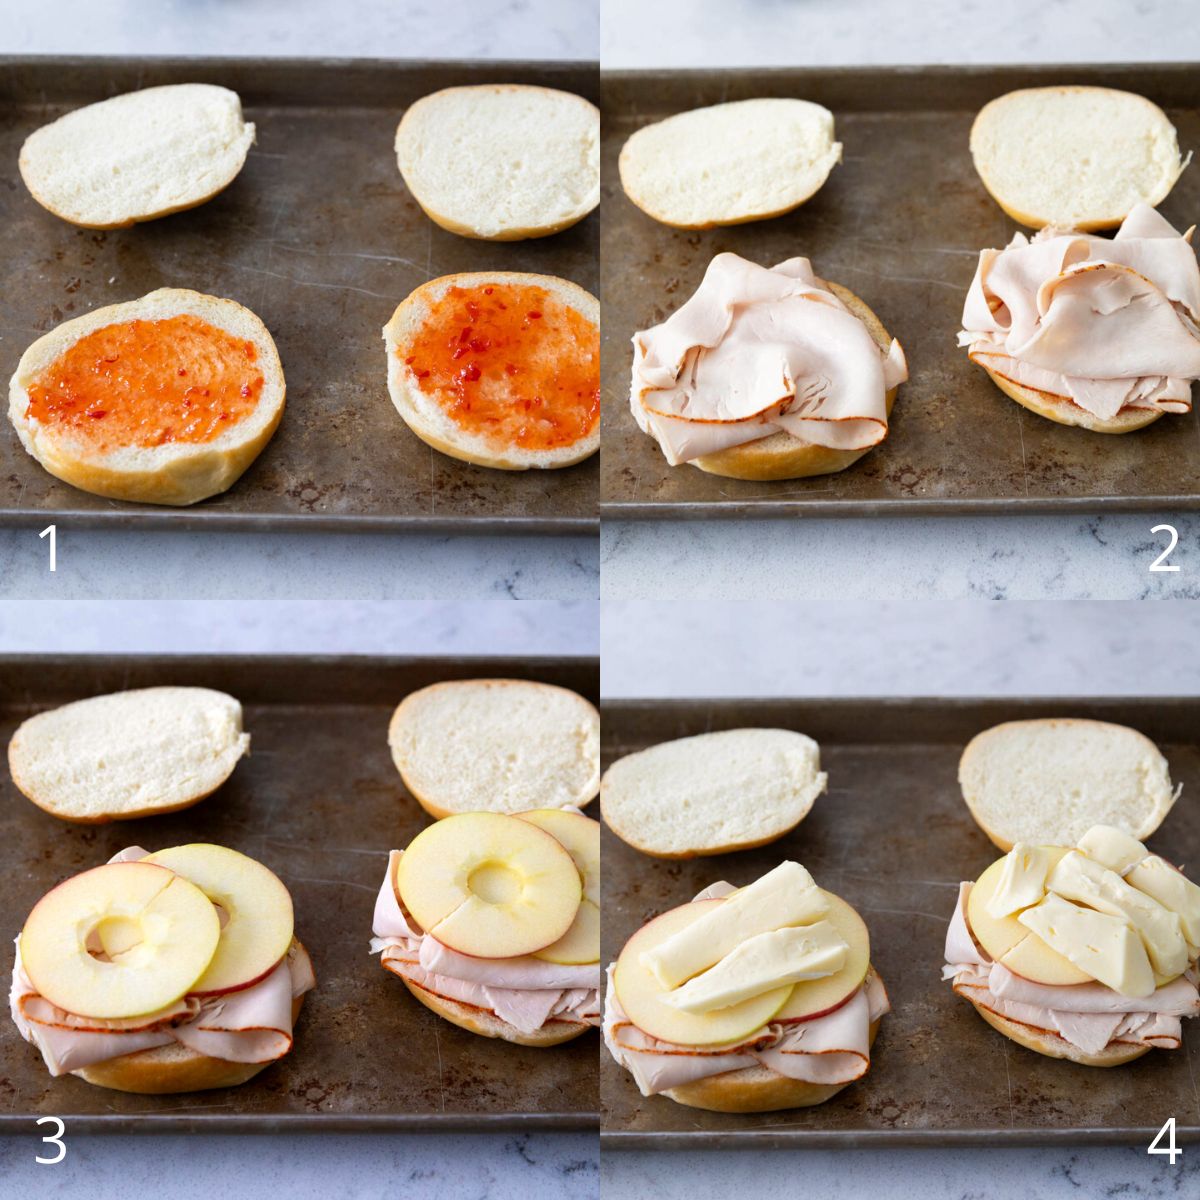 The step by step photos show how to layer the sandwich fillings before baking.